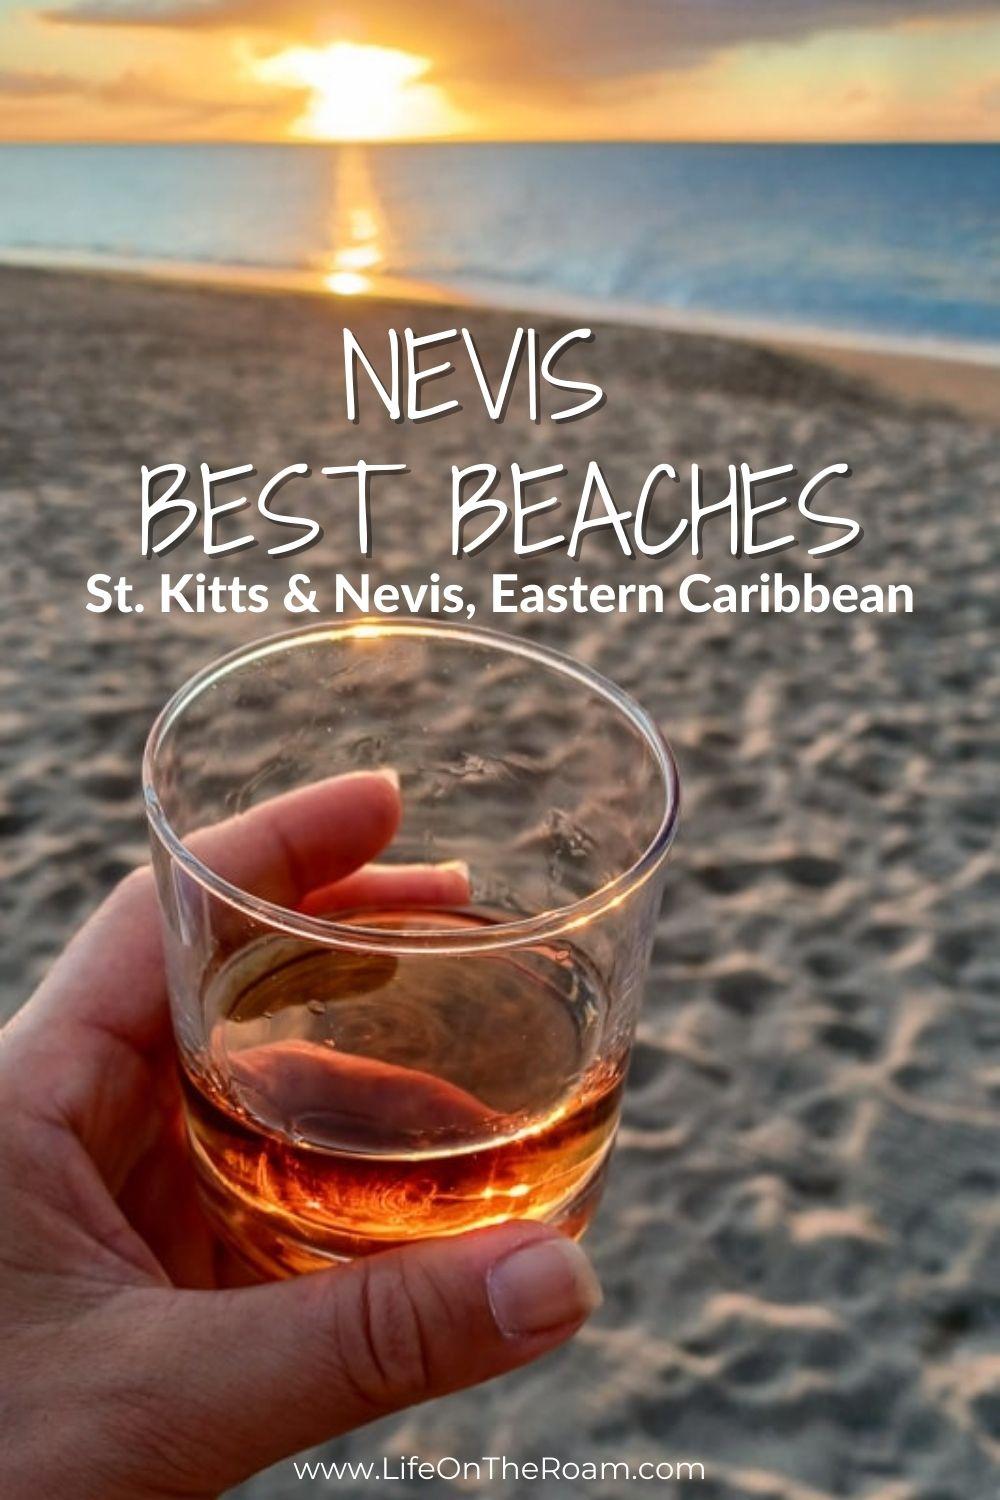 A sunset at a sandy beach with a glass of rum in the foreground and the text "Nevis Best Beaches, St Kitts & Nevis, Eastern Caribbean"